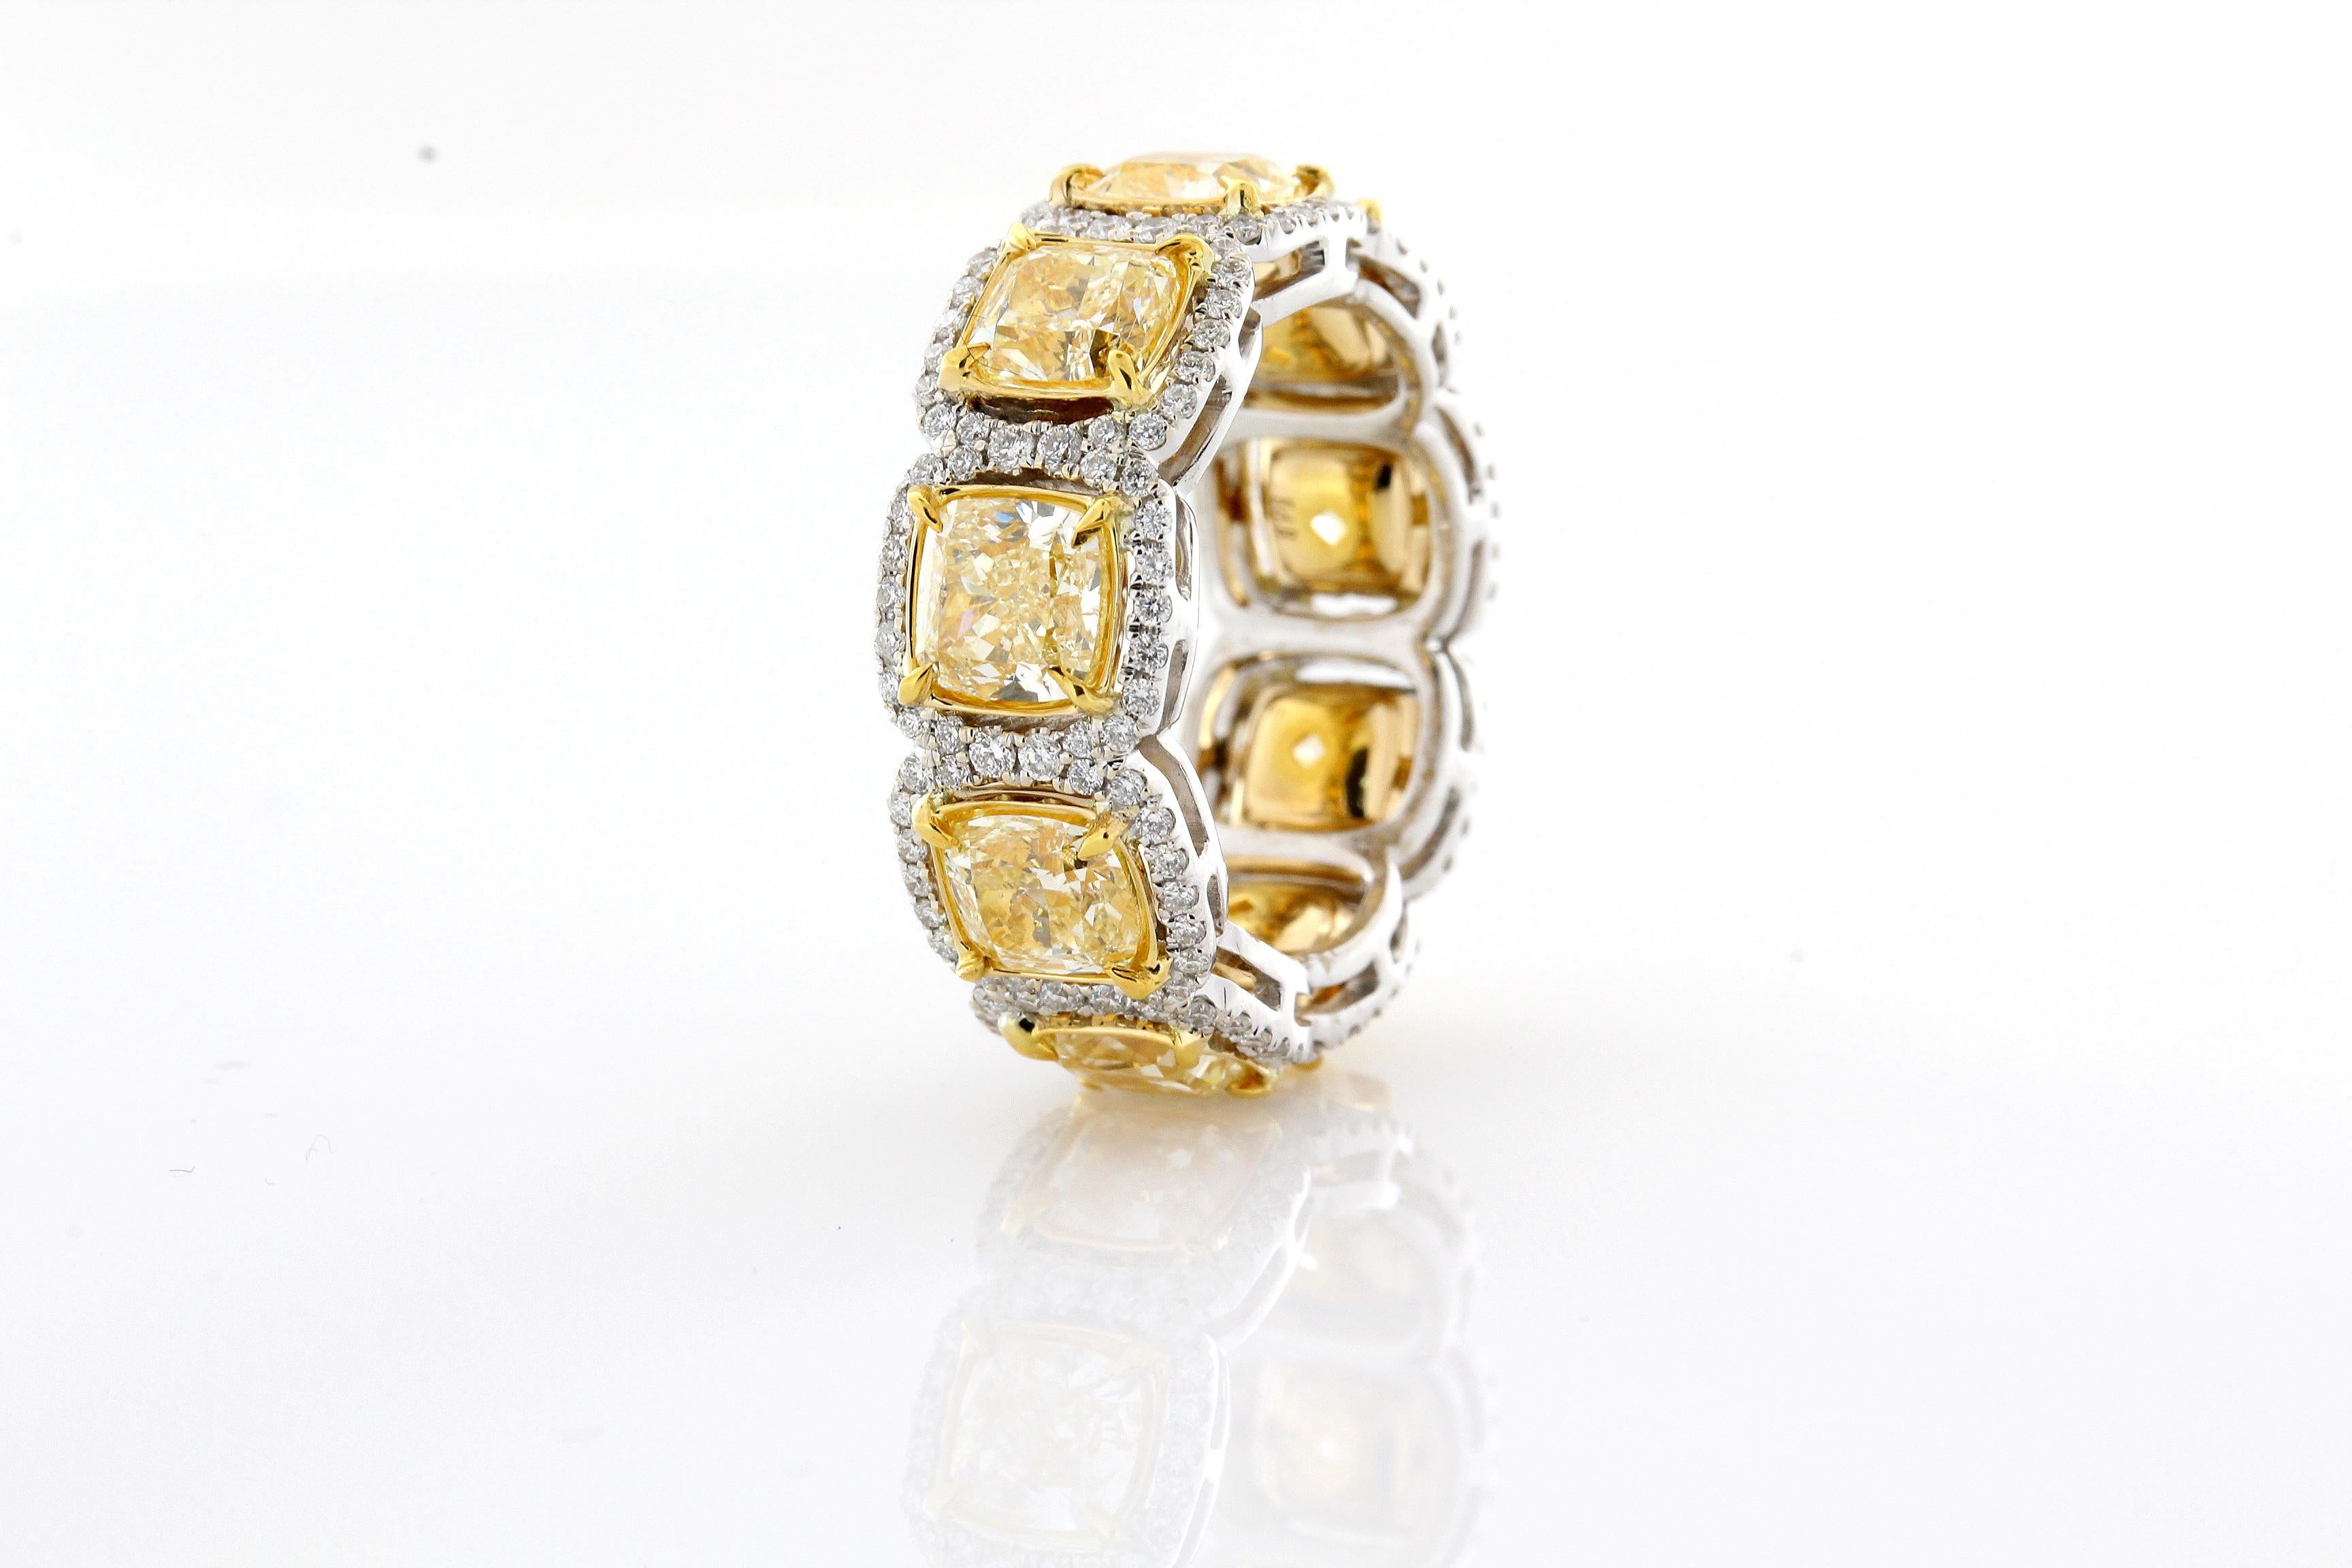 Incredible Deal on 6.66 Carat Total Weight Cushion Cut, Natural Fancy Yellow Color VS Clarity Diamond Eternity Halo Style Ring.
Total Carat Weight on the ring is 7.46

This Classic mounting is fashioned from 18 Karat White and Yellow Gold. 
There